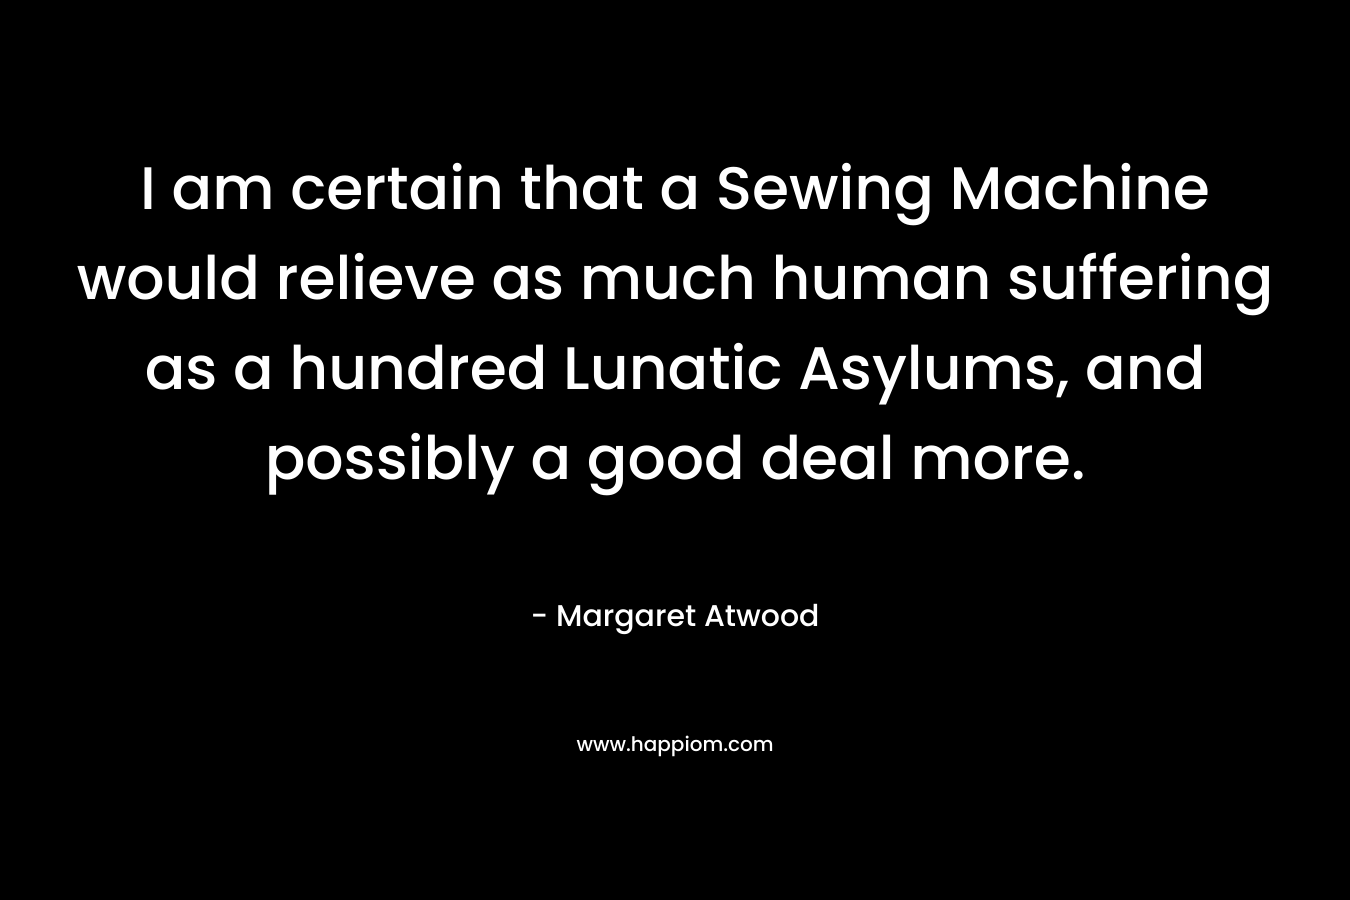 I am certain that a Sewing Machine would relieve as much human suffering as a hundred Lunatic Asylums, and possibly a good deal more.